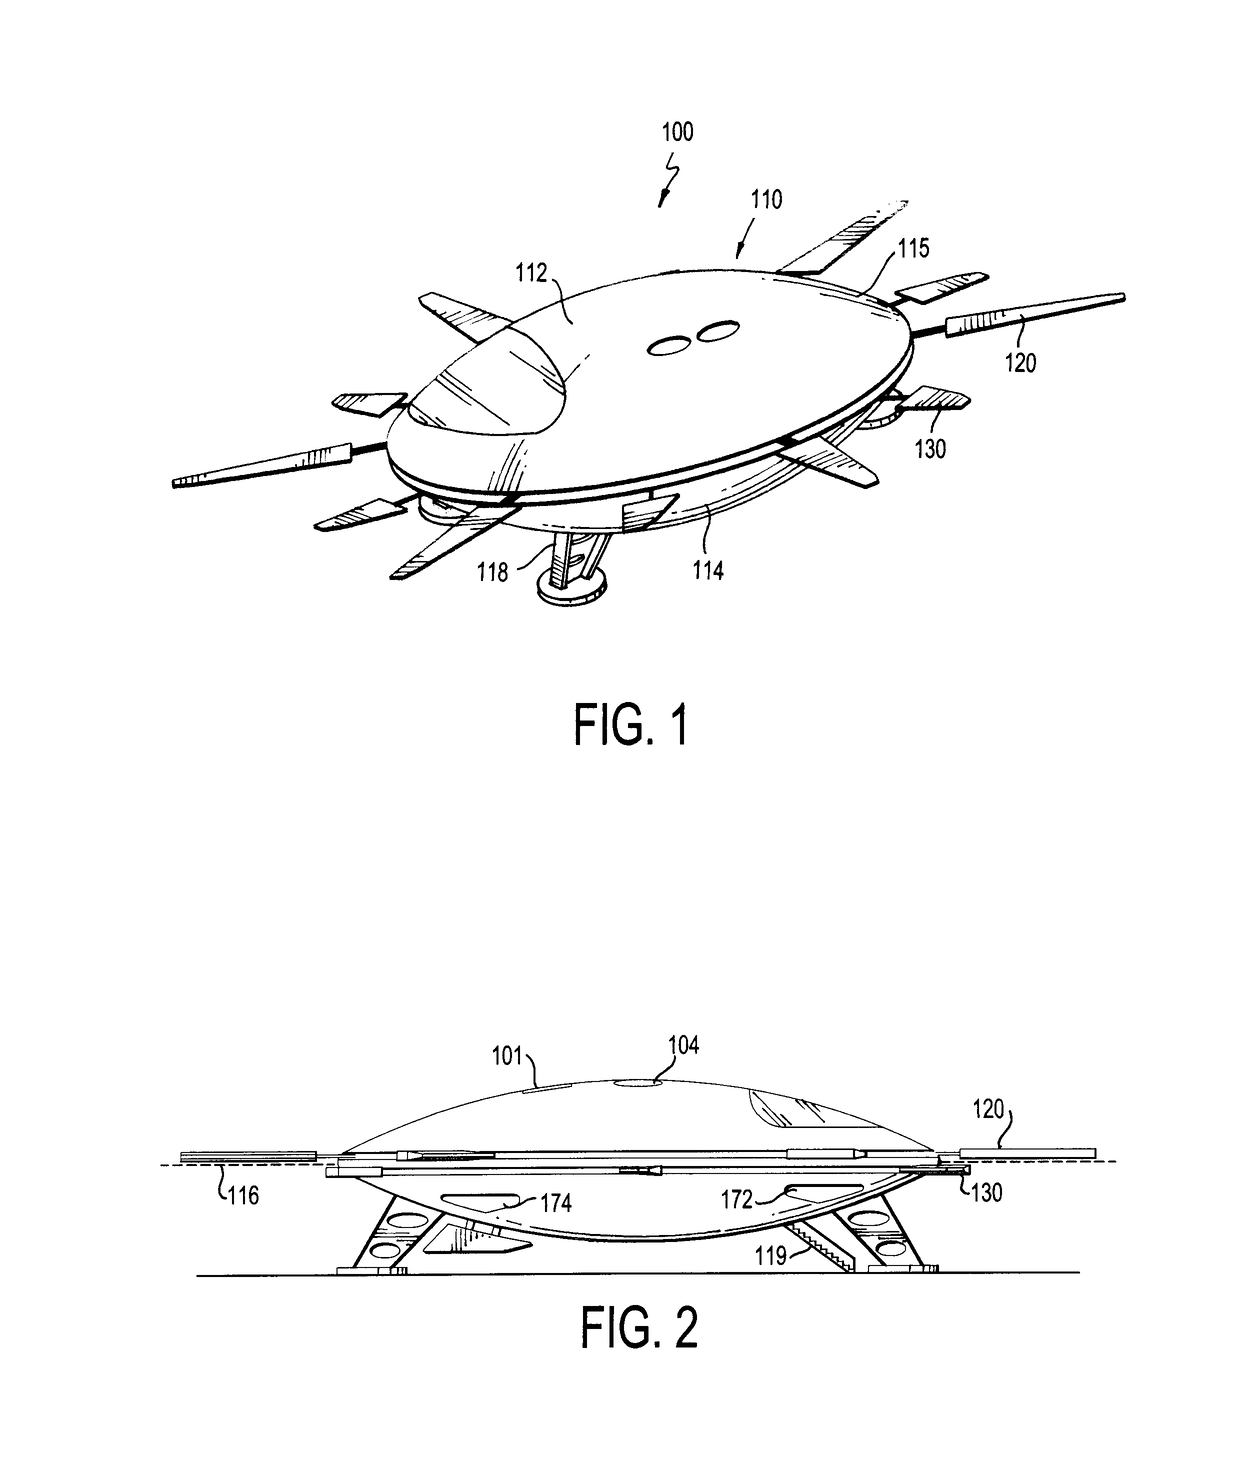 Drone aircraft